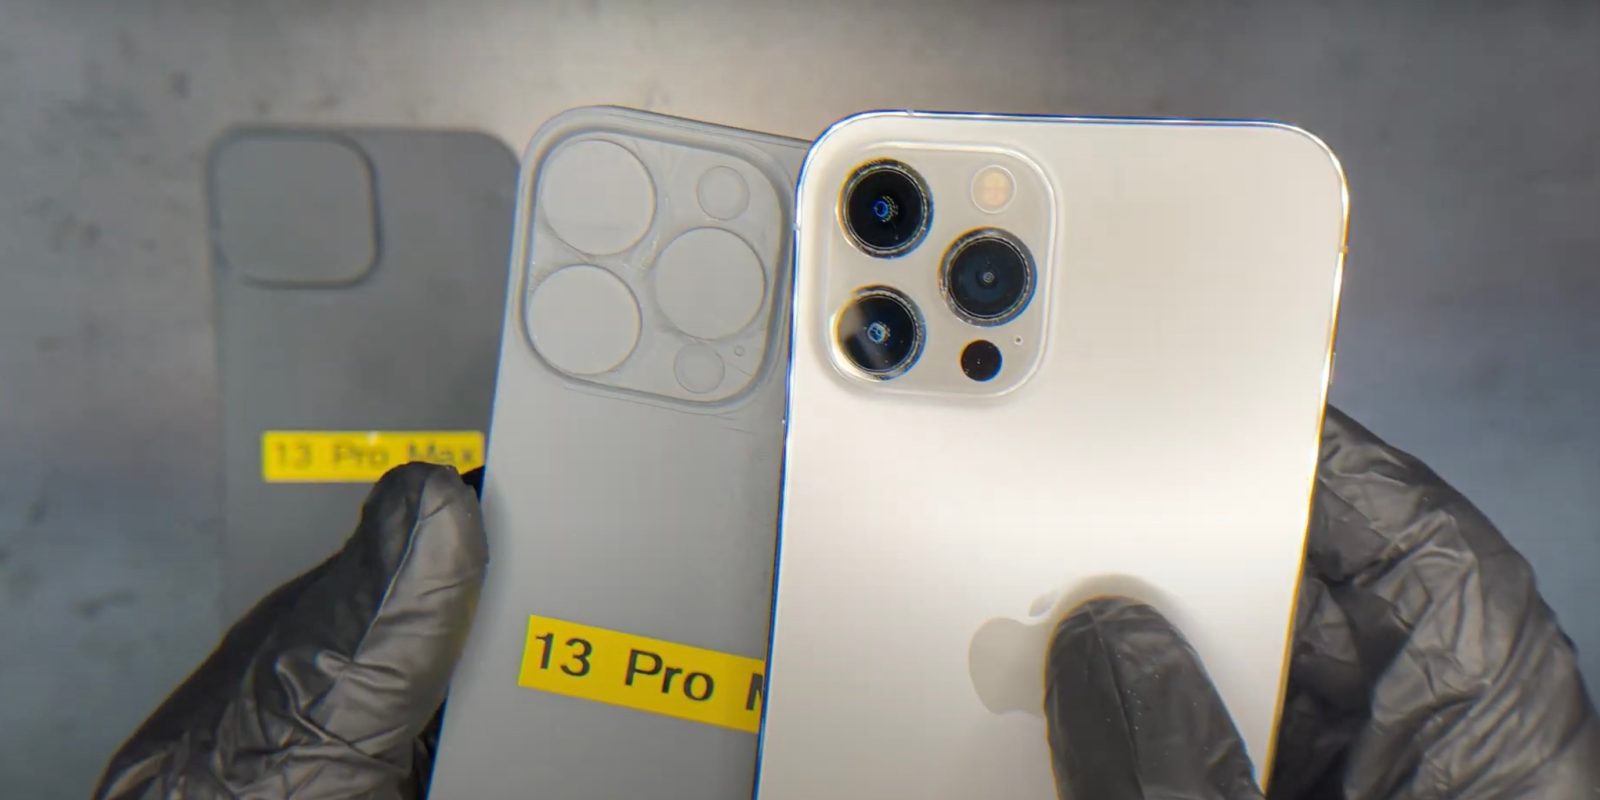 Leaked schematics show significantly larger camera lenses on iPhone 13